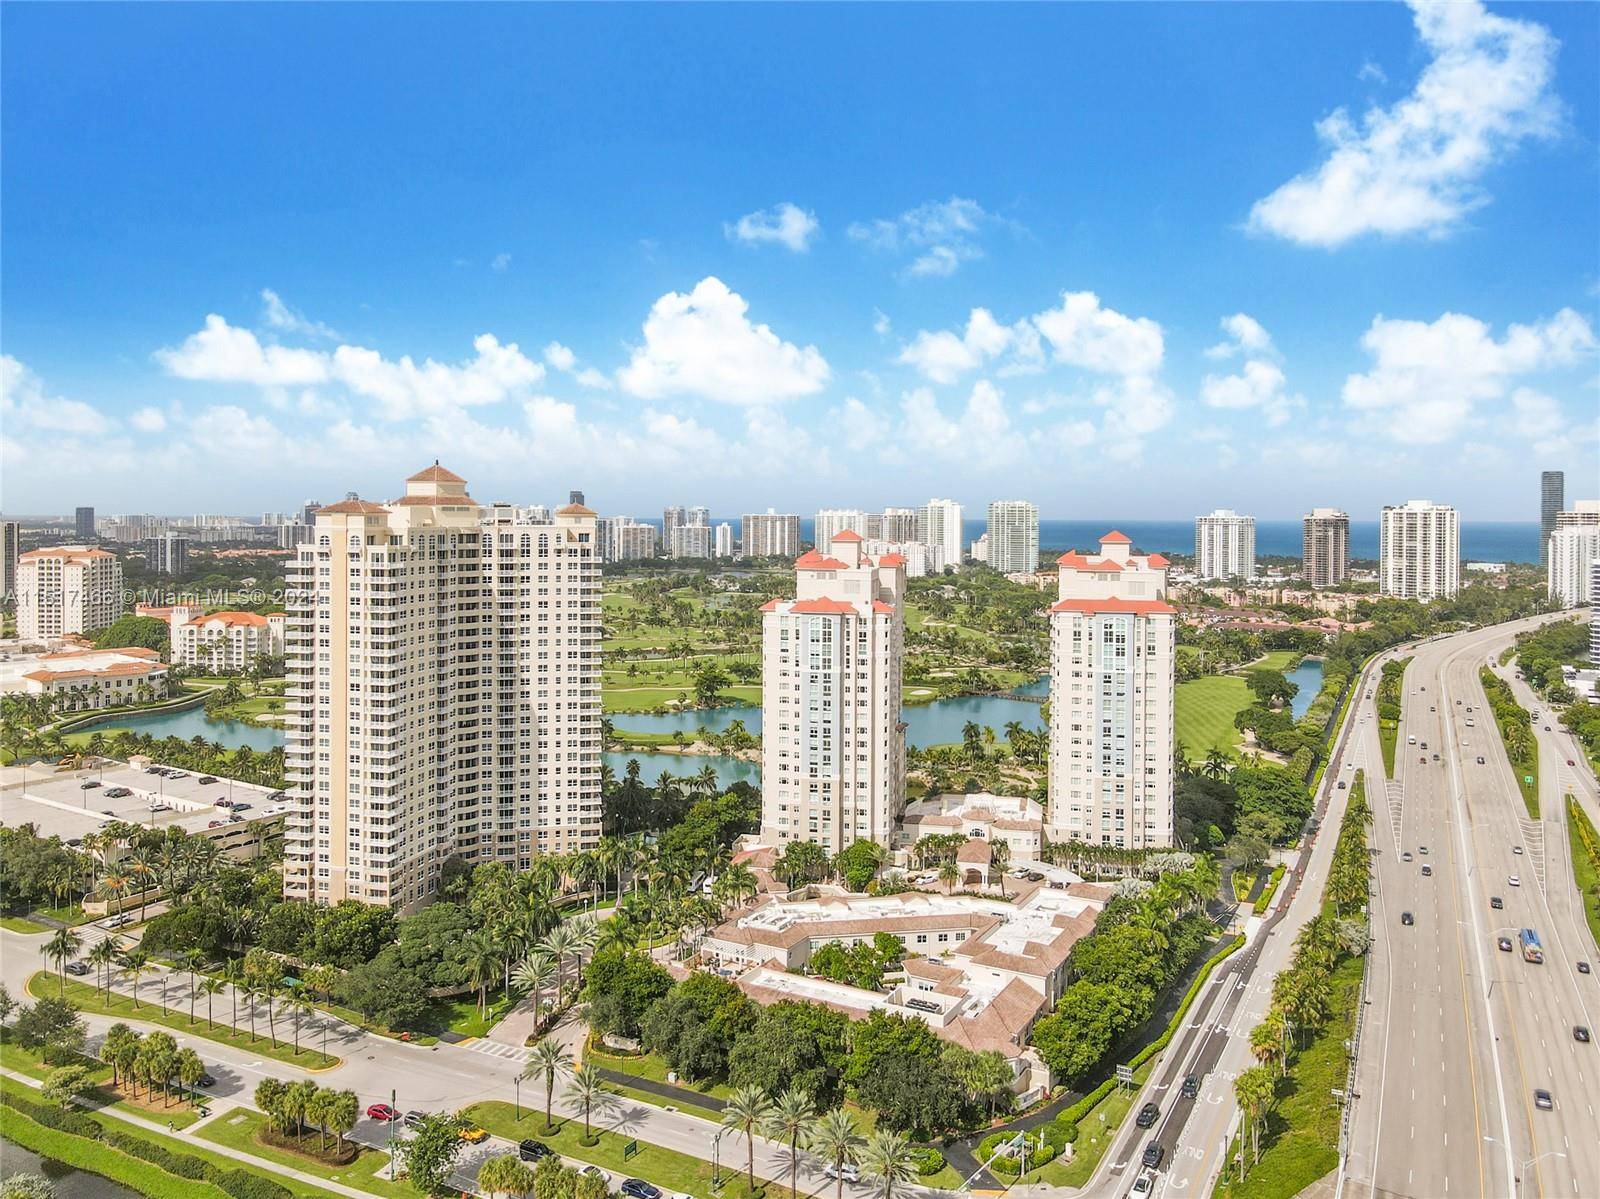 Fully furnished unit on the 24th floor with balcony overlooking the city of Aventura.